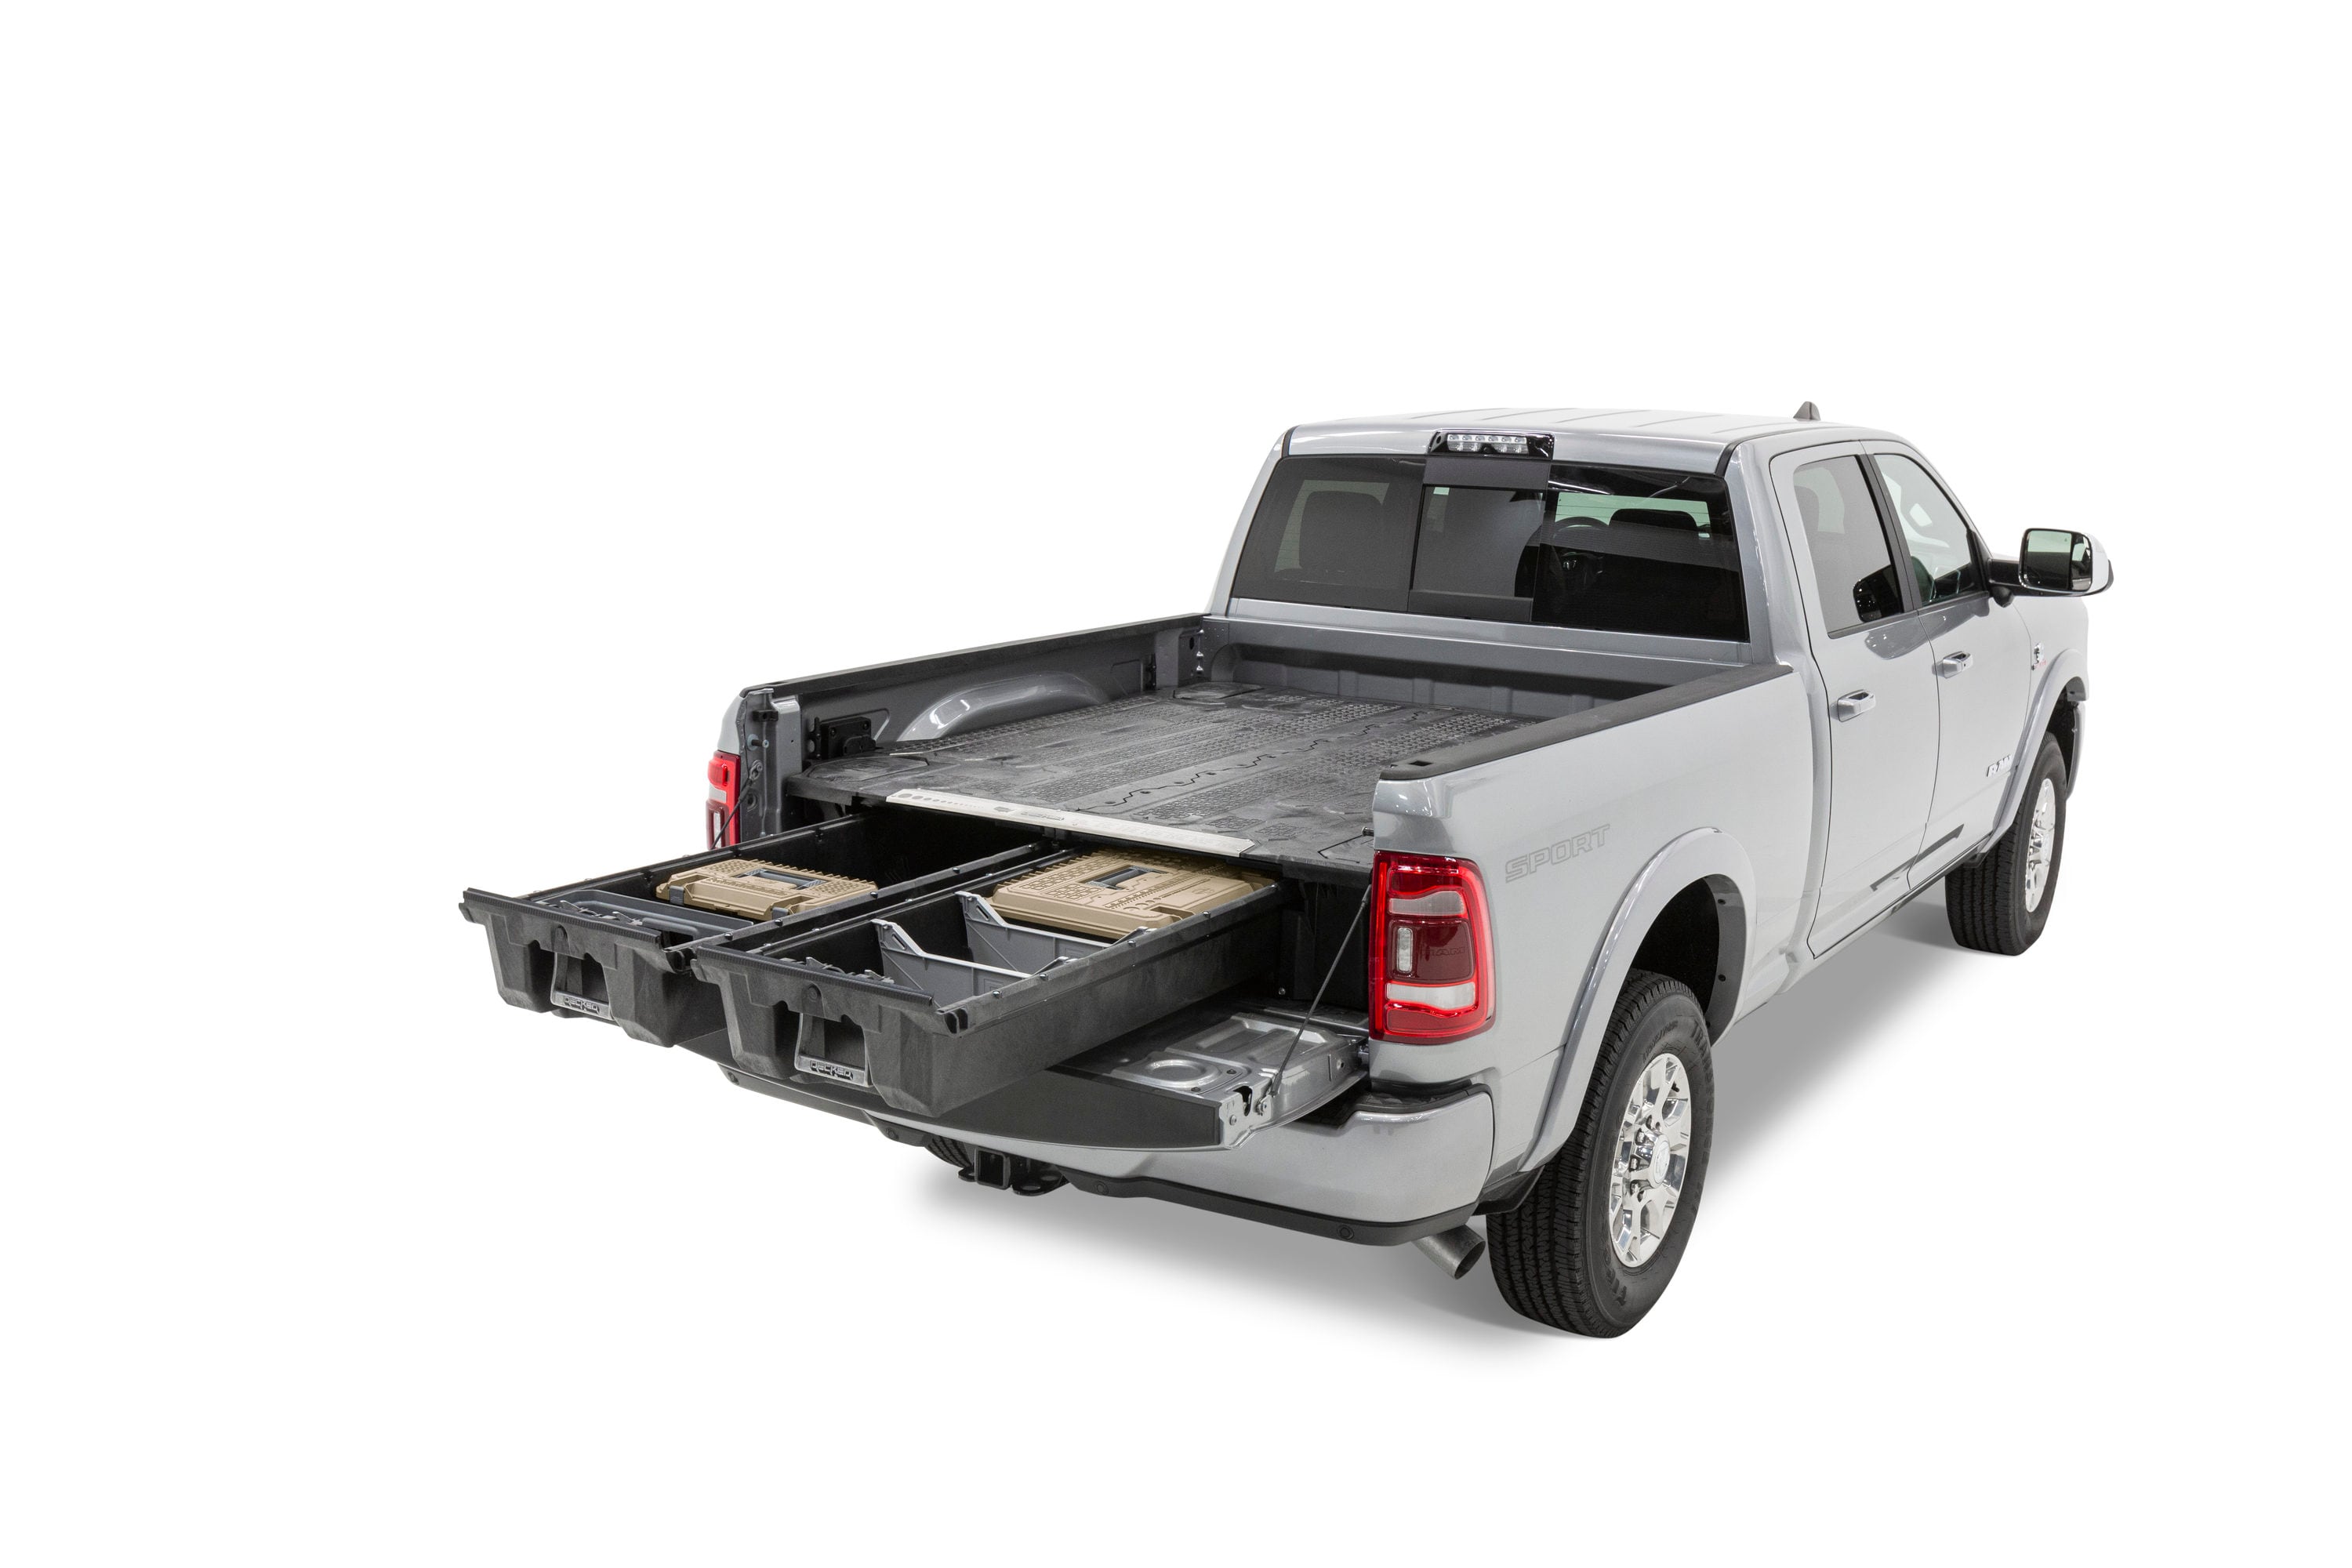 Tonneau Covers for Trucks—You Can Have it All!